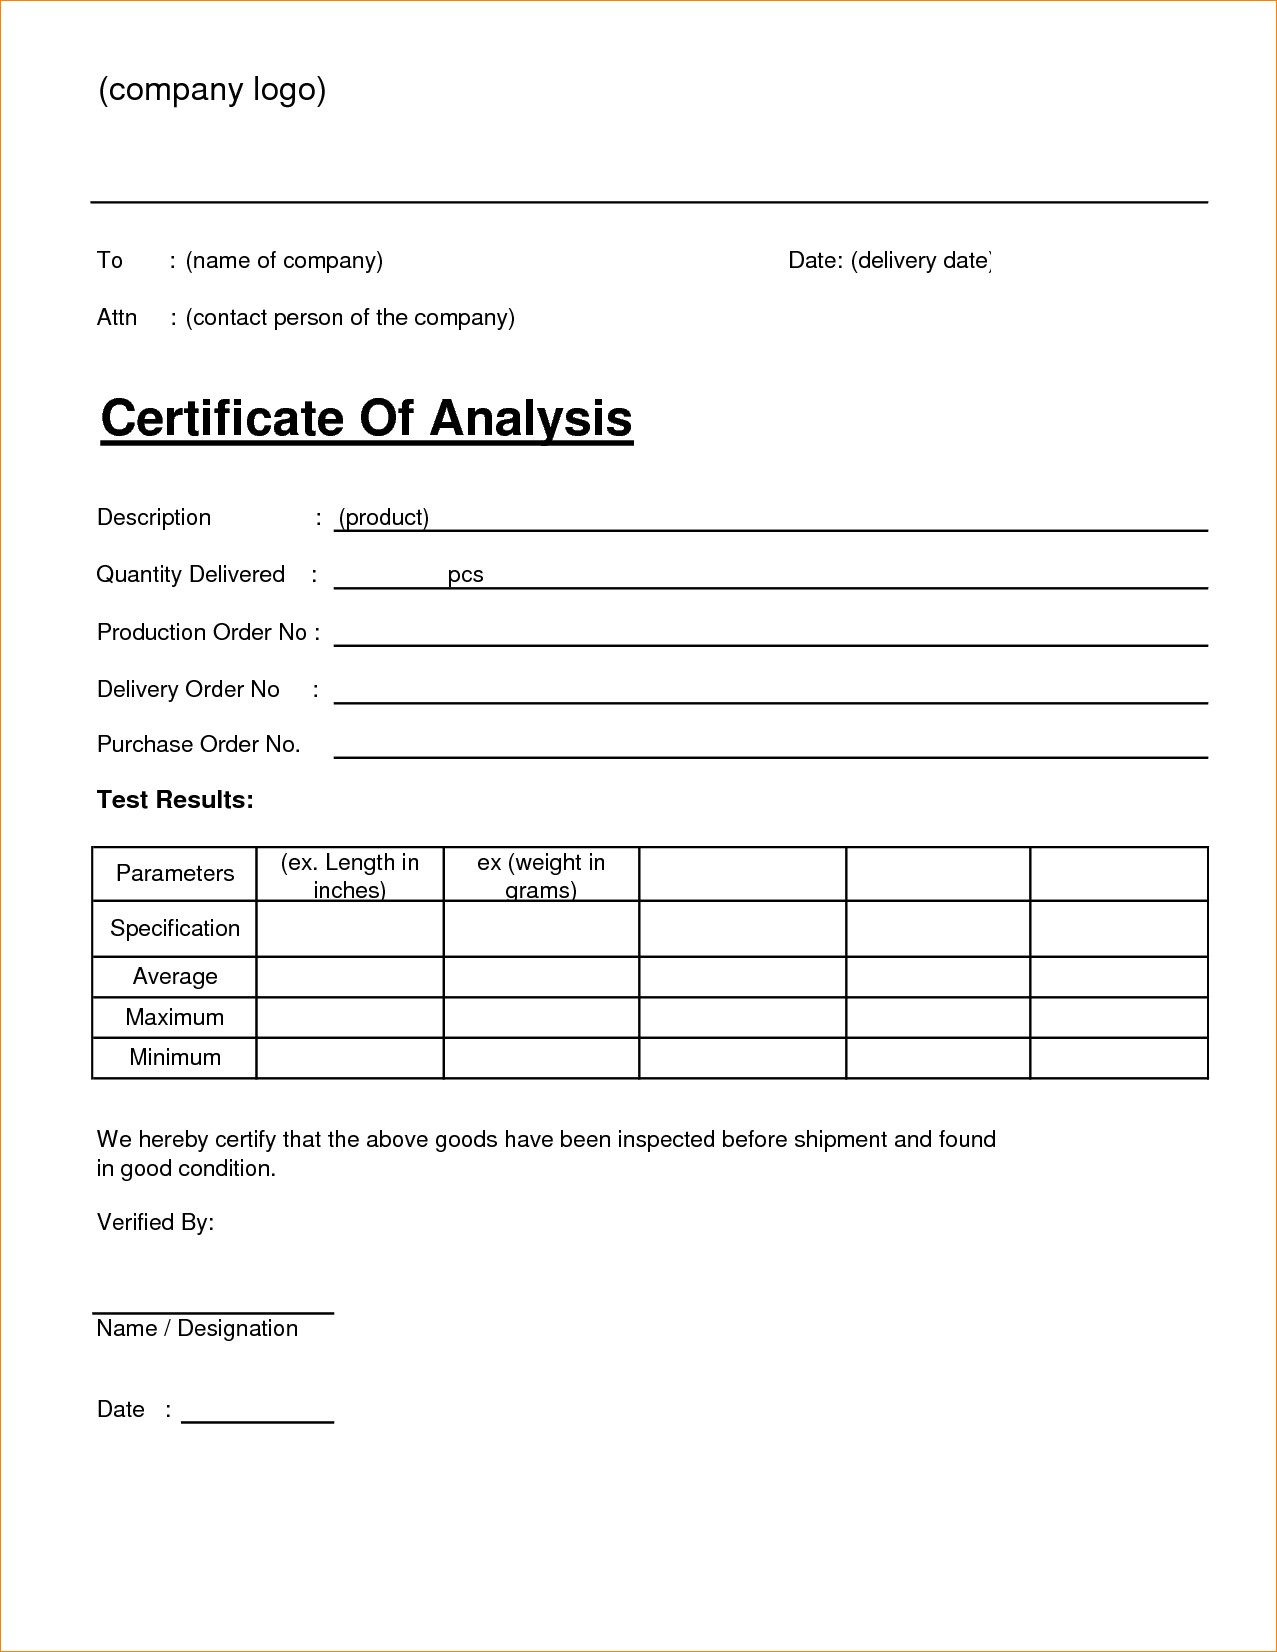 Certificate of Analysis Template 